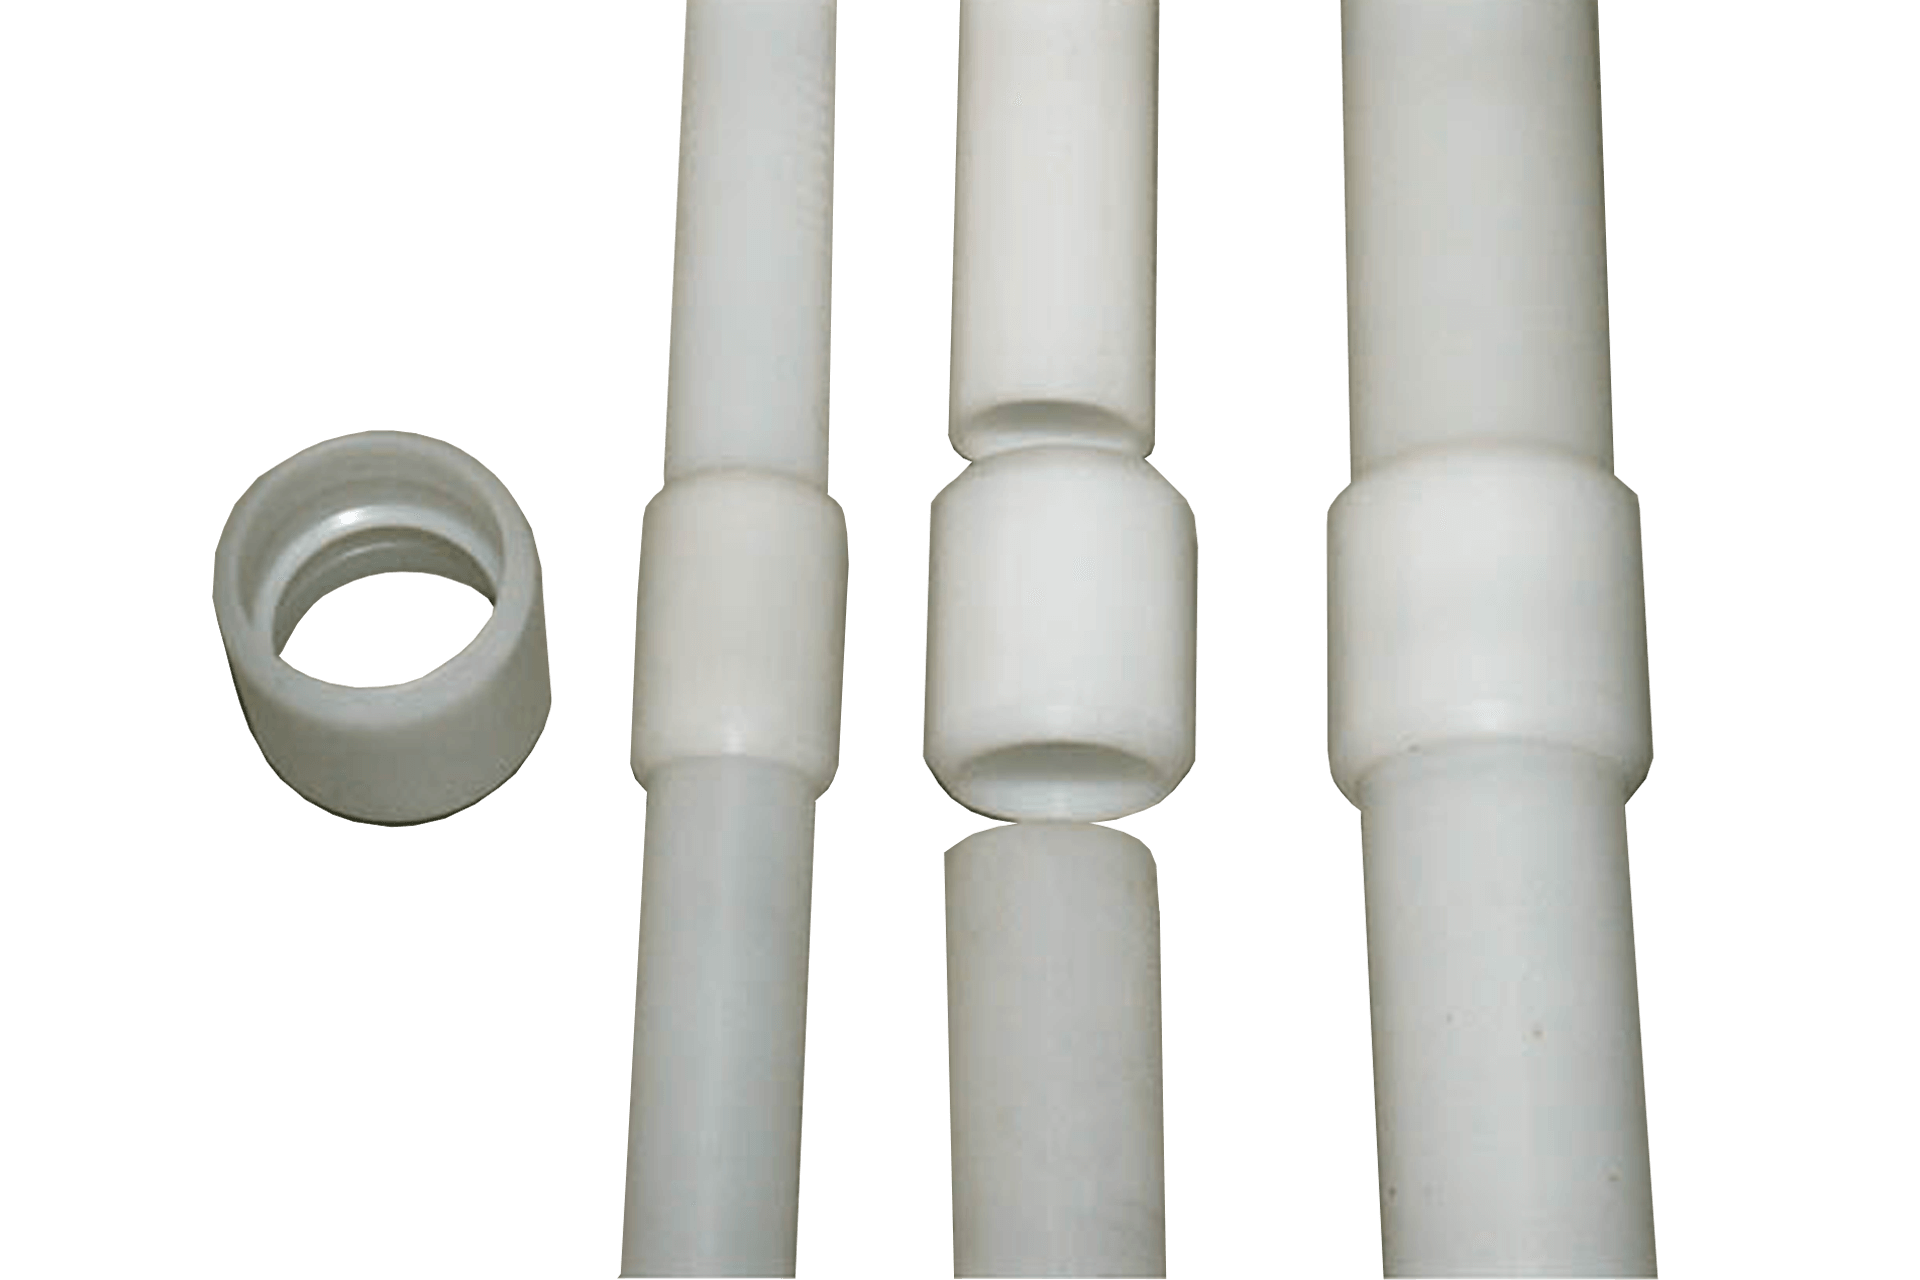 HDPE pipe with clamping socket connection